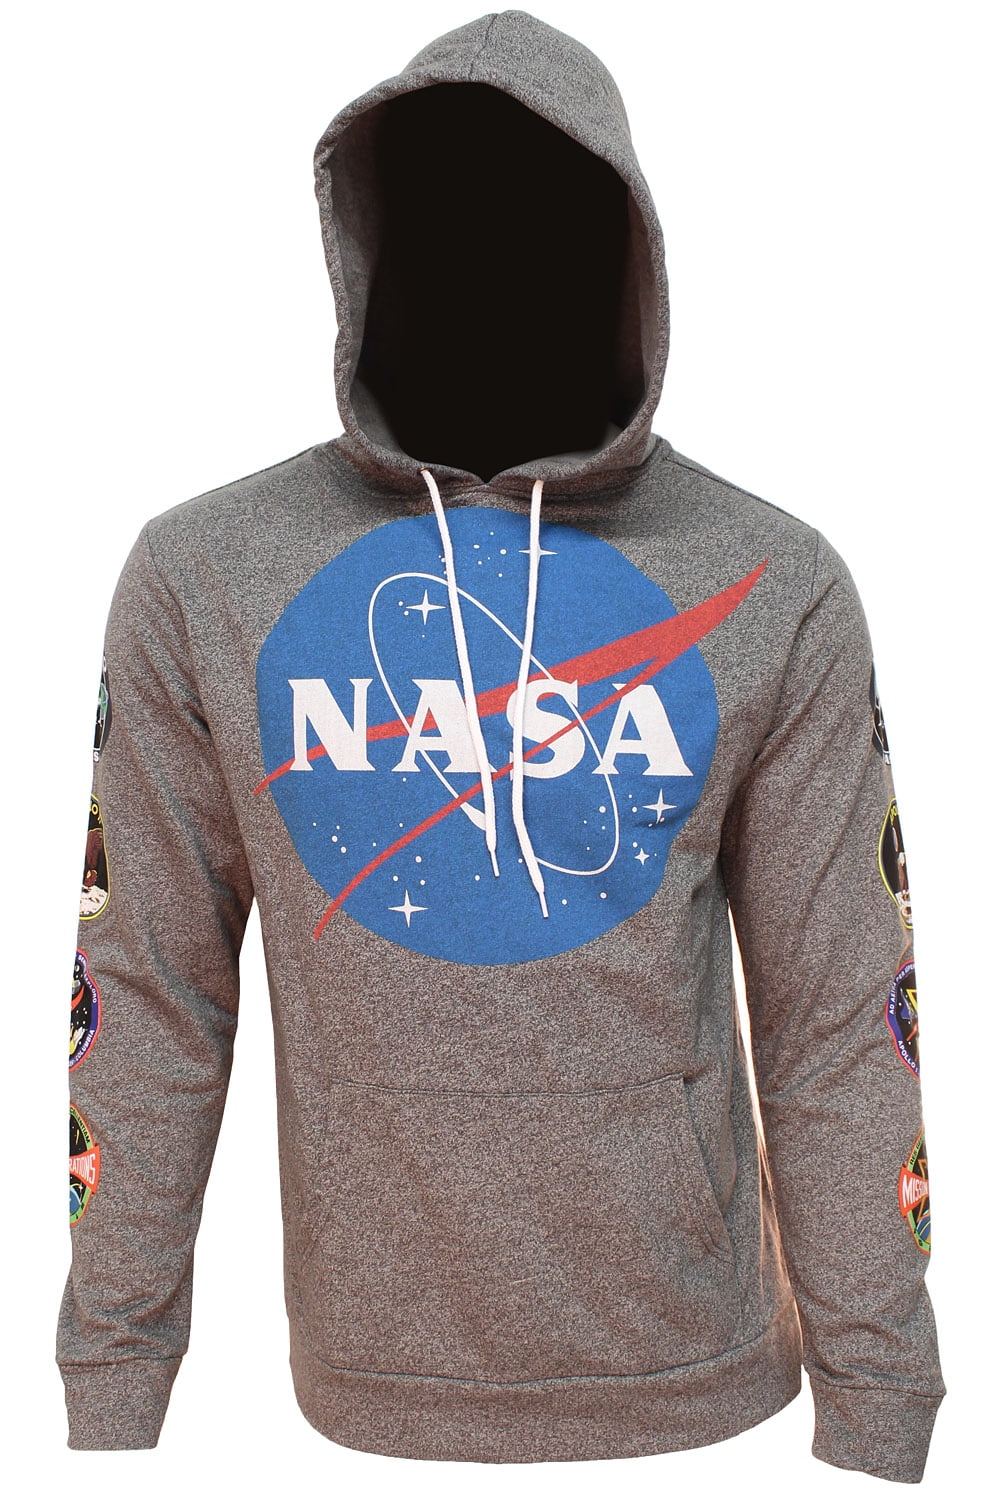 NASA Hoodie Apollo Mission Patch Black Hoody